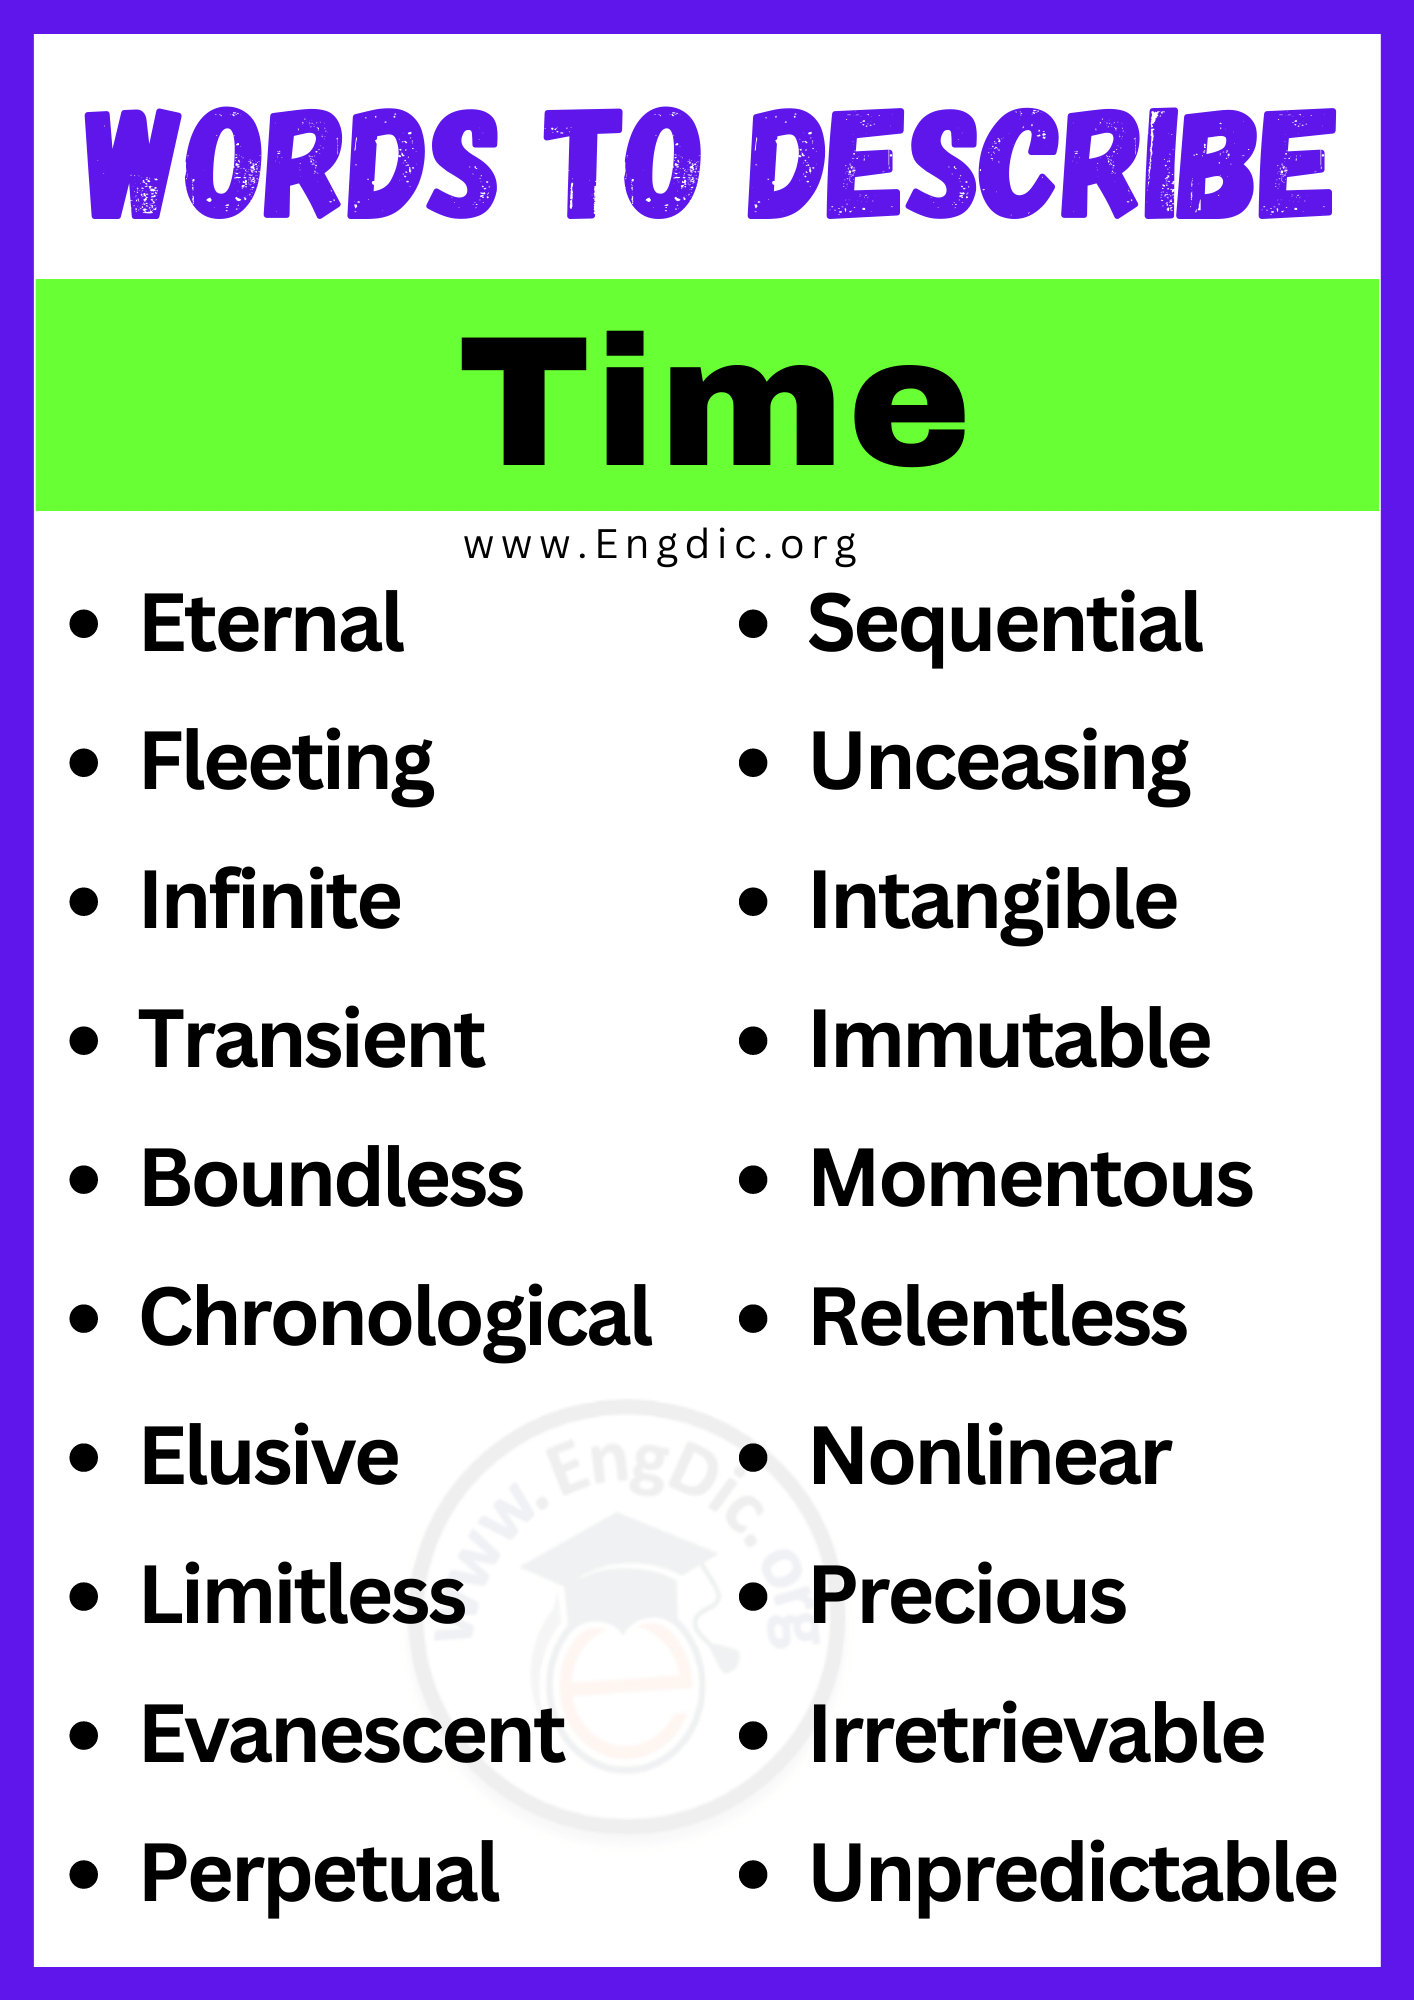 Words to Describe Time